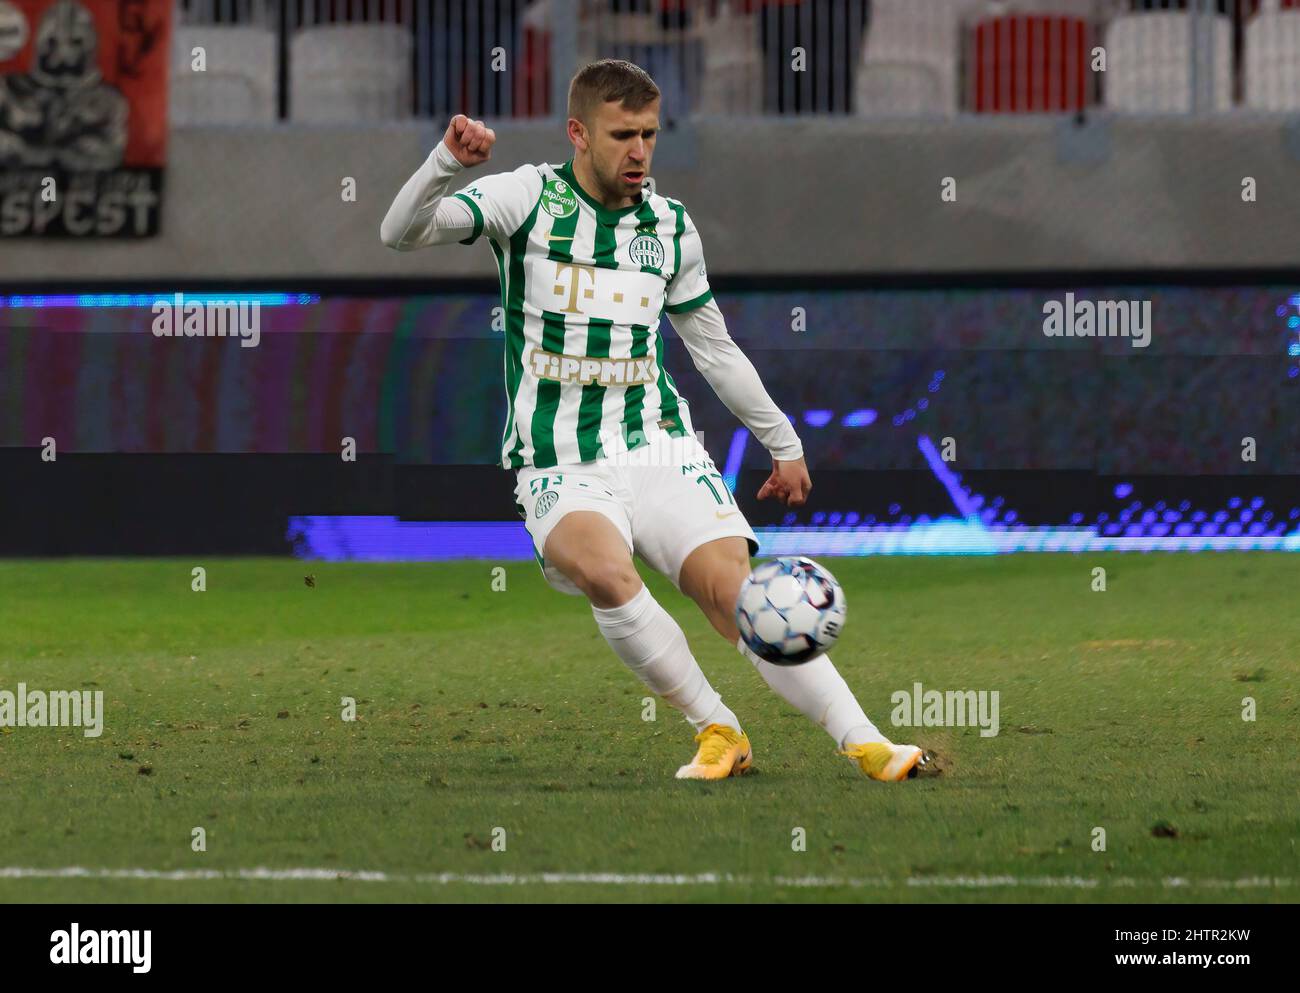 BUDAPEST, HUNGARY - MARCH 1: Eldar Civic of Ferencvarosi TC kicks the ball during the Hungarian Cup Quarter Final match between Budapest Honved and Ferencvarosi TC at Bozsik Arena on March 1, 2022 in Budapest, Hungary. Stock Photo